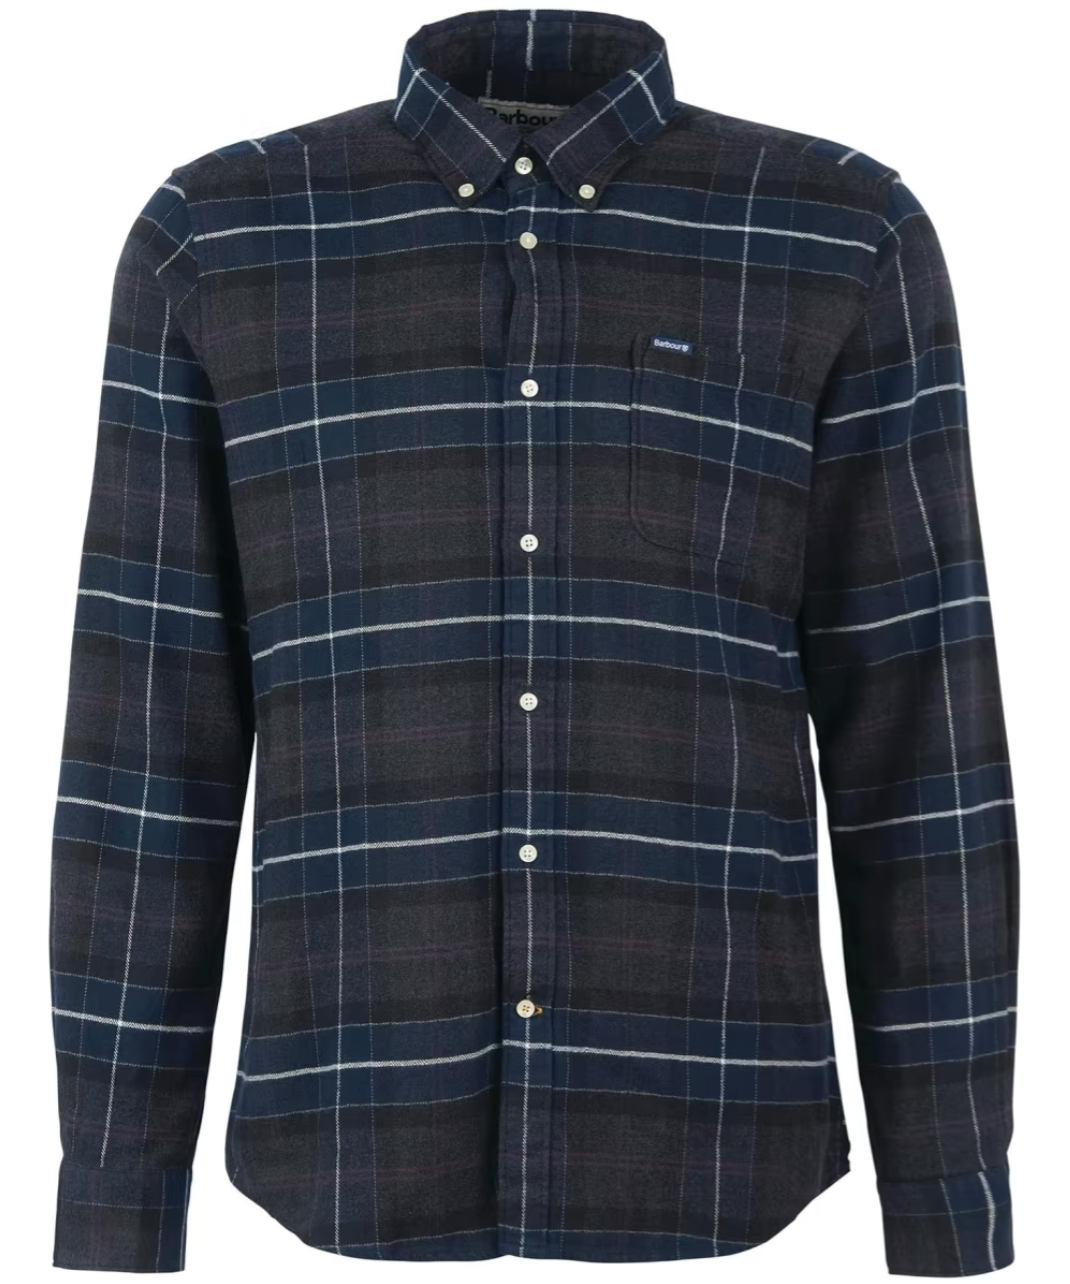 Barbour Kyeloch Men's Tailored Shirt